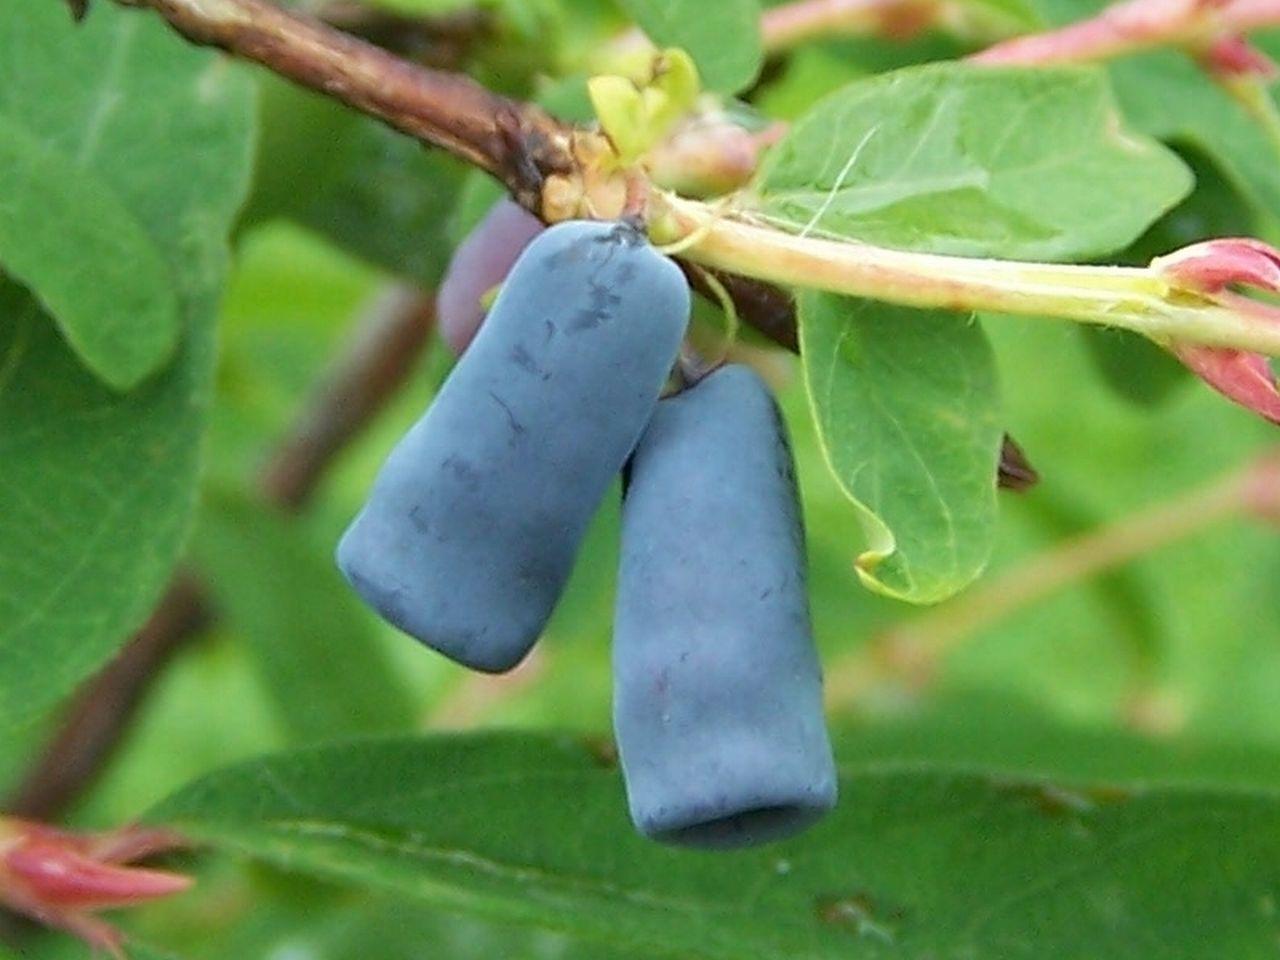 Violet fruit, yellow-brown stem, green leaves yellow midrib and blades.